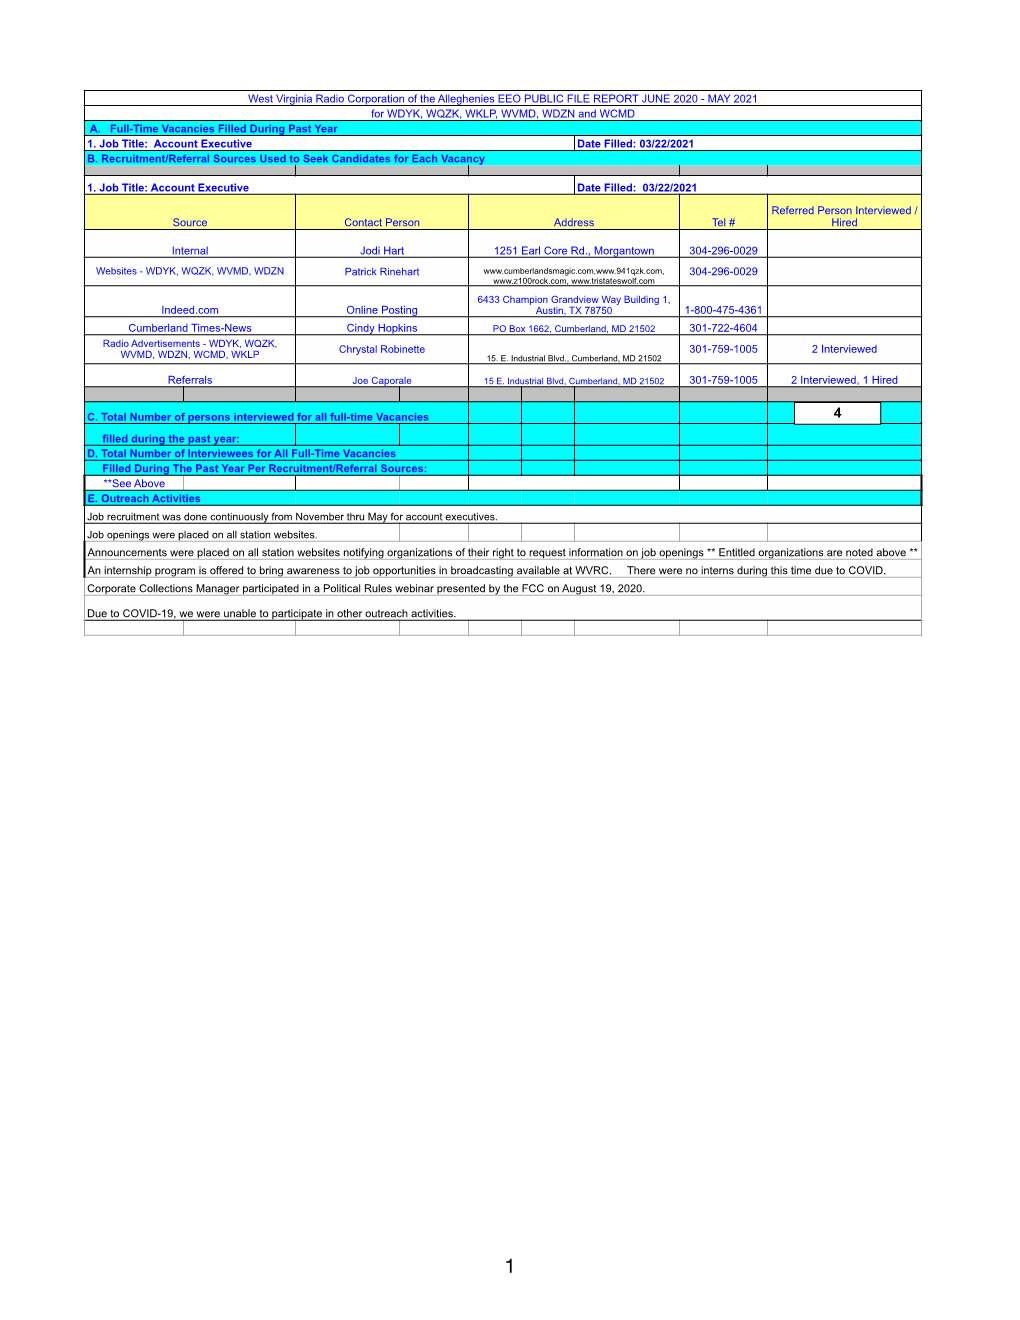 Alleghenies EEO PUBLIC FILE REPORT JUNE 2020 - MAY 2021 for WDYK, WQZK, WKLP, WVMD, WDZN and WCMD A